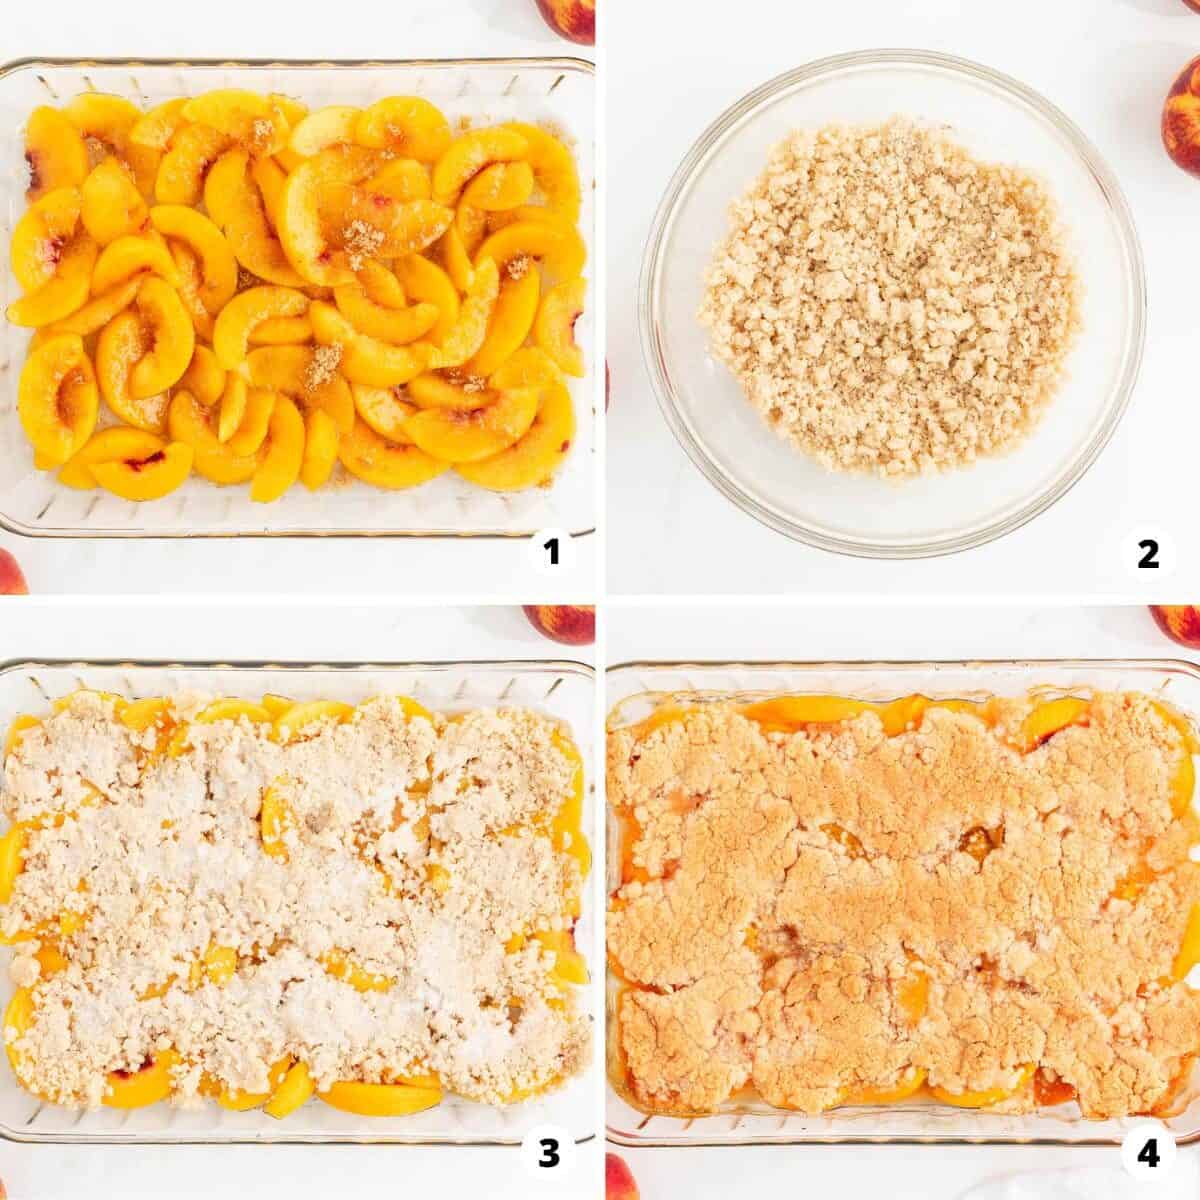 Showing how to make peach cobbler in a 4 step collage.